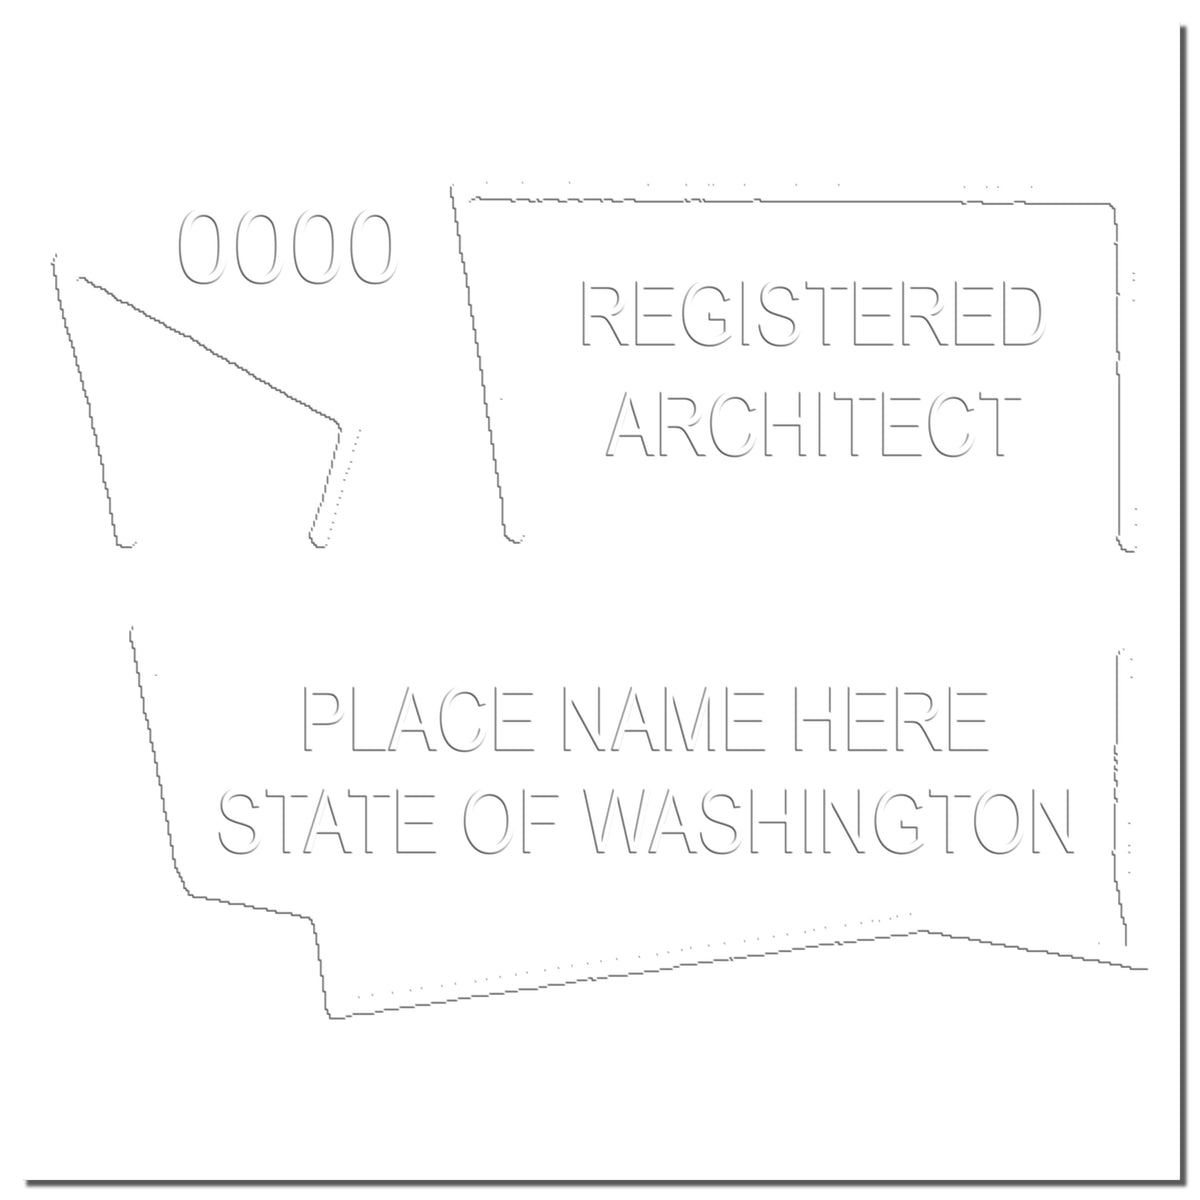 This paper is stamped with a sample imprint of the Hybrid Washington Architect Seal, signifying its quality and reliability.